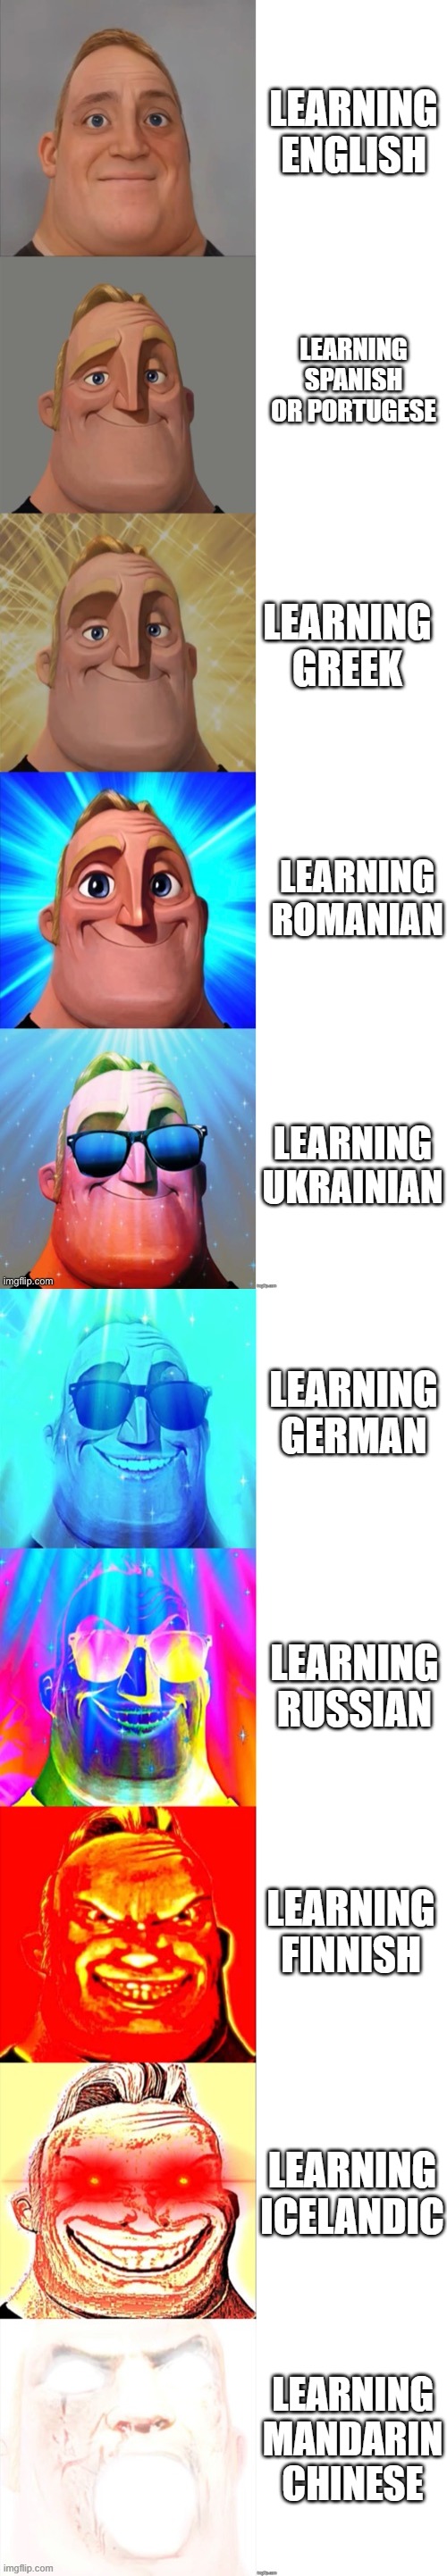 Learning different languages | LEARNING ENGLISH; LEARNING SPANISH OR PORTUGESE; LEARNING GREEK; LEARNING ROMANIAN; LEARNING UKRAINIAN; LEARNING GERMAN; LEARNING RUSSIAN; LEARNING FINNISH; LEARNING ICELANDIC; LEARNING MANDARIN CHINESE | image tagged in mr incredible becoming canny | made w/ Imgflip meme maker